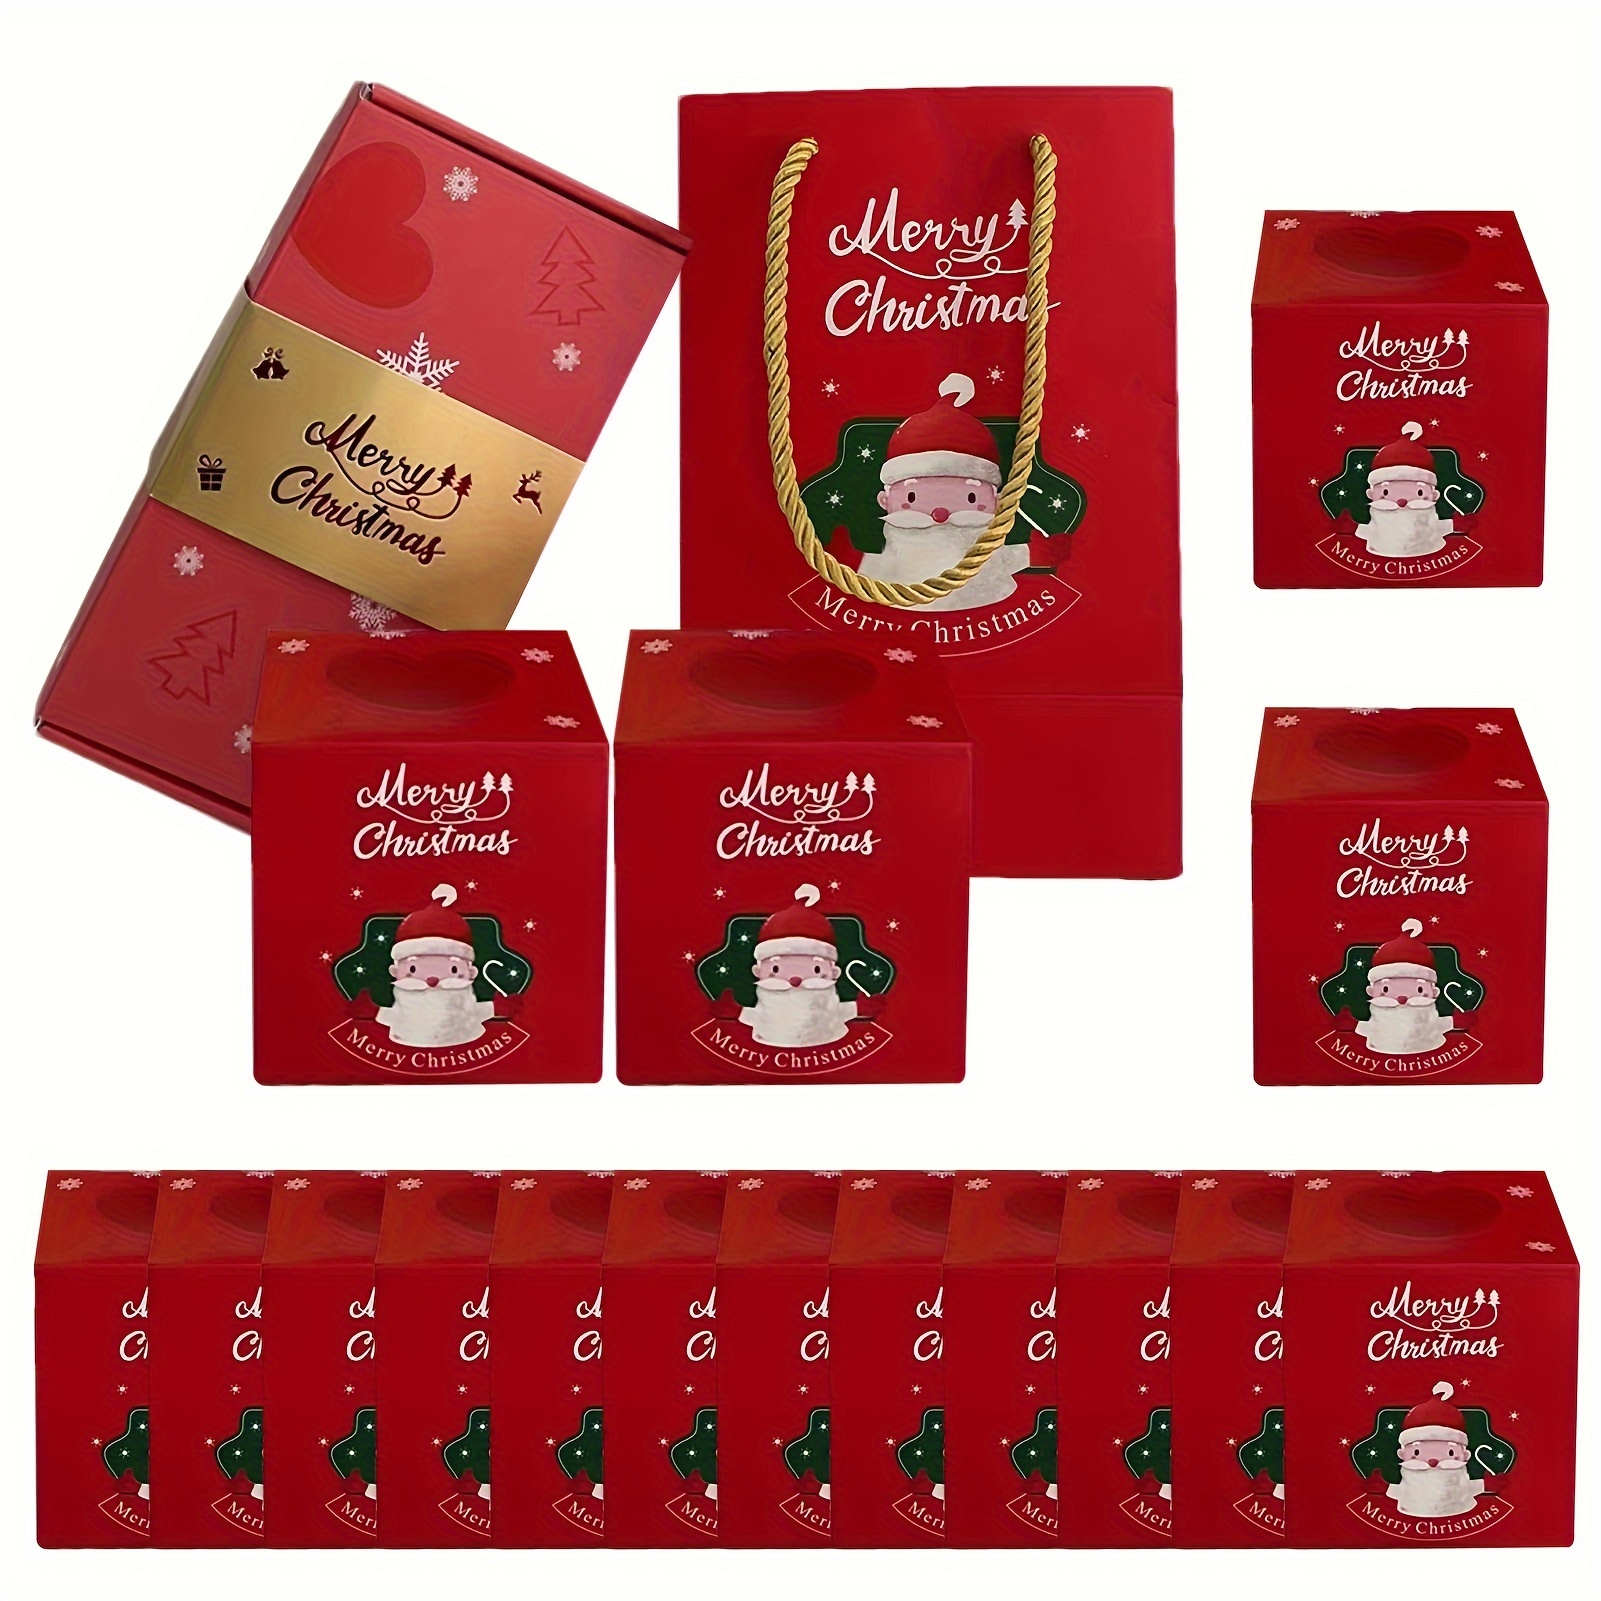 Christmas Gift Card Holder Boxes: 8PCS Gift Card Holder with Lids and  Greeting Card Holiday Tins Holders for Christmas Party Favors